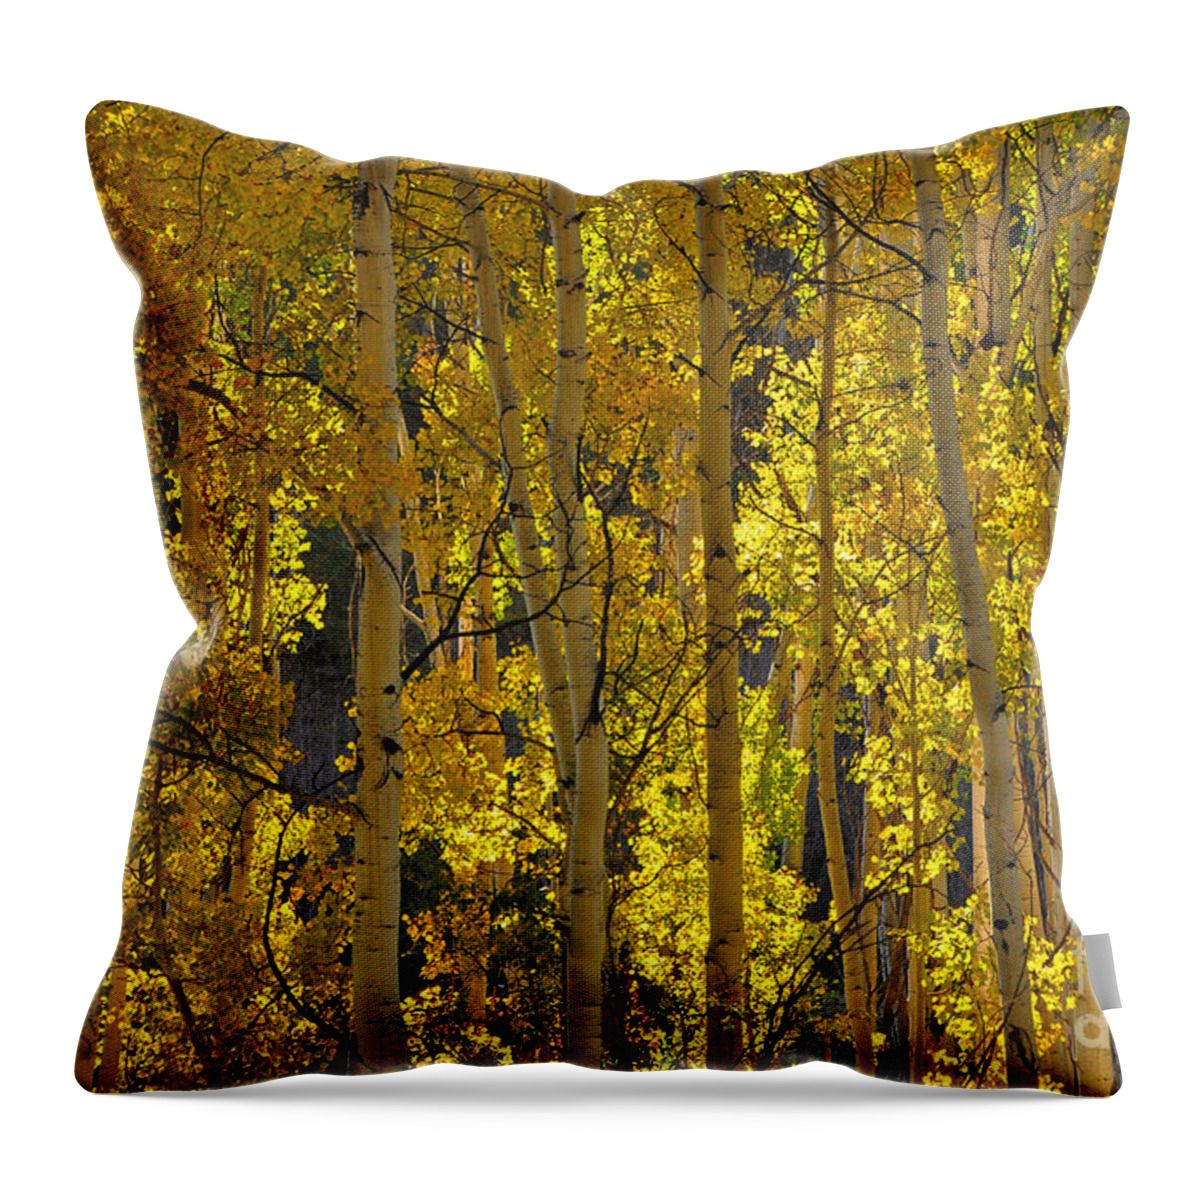 Aspens Throw Pillow featuring the photograph Last Dollar Aspens by Randy Rogers